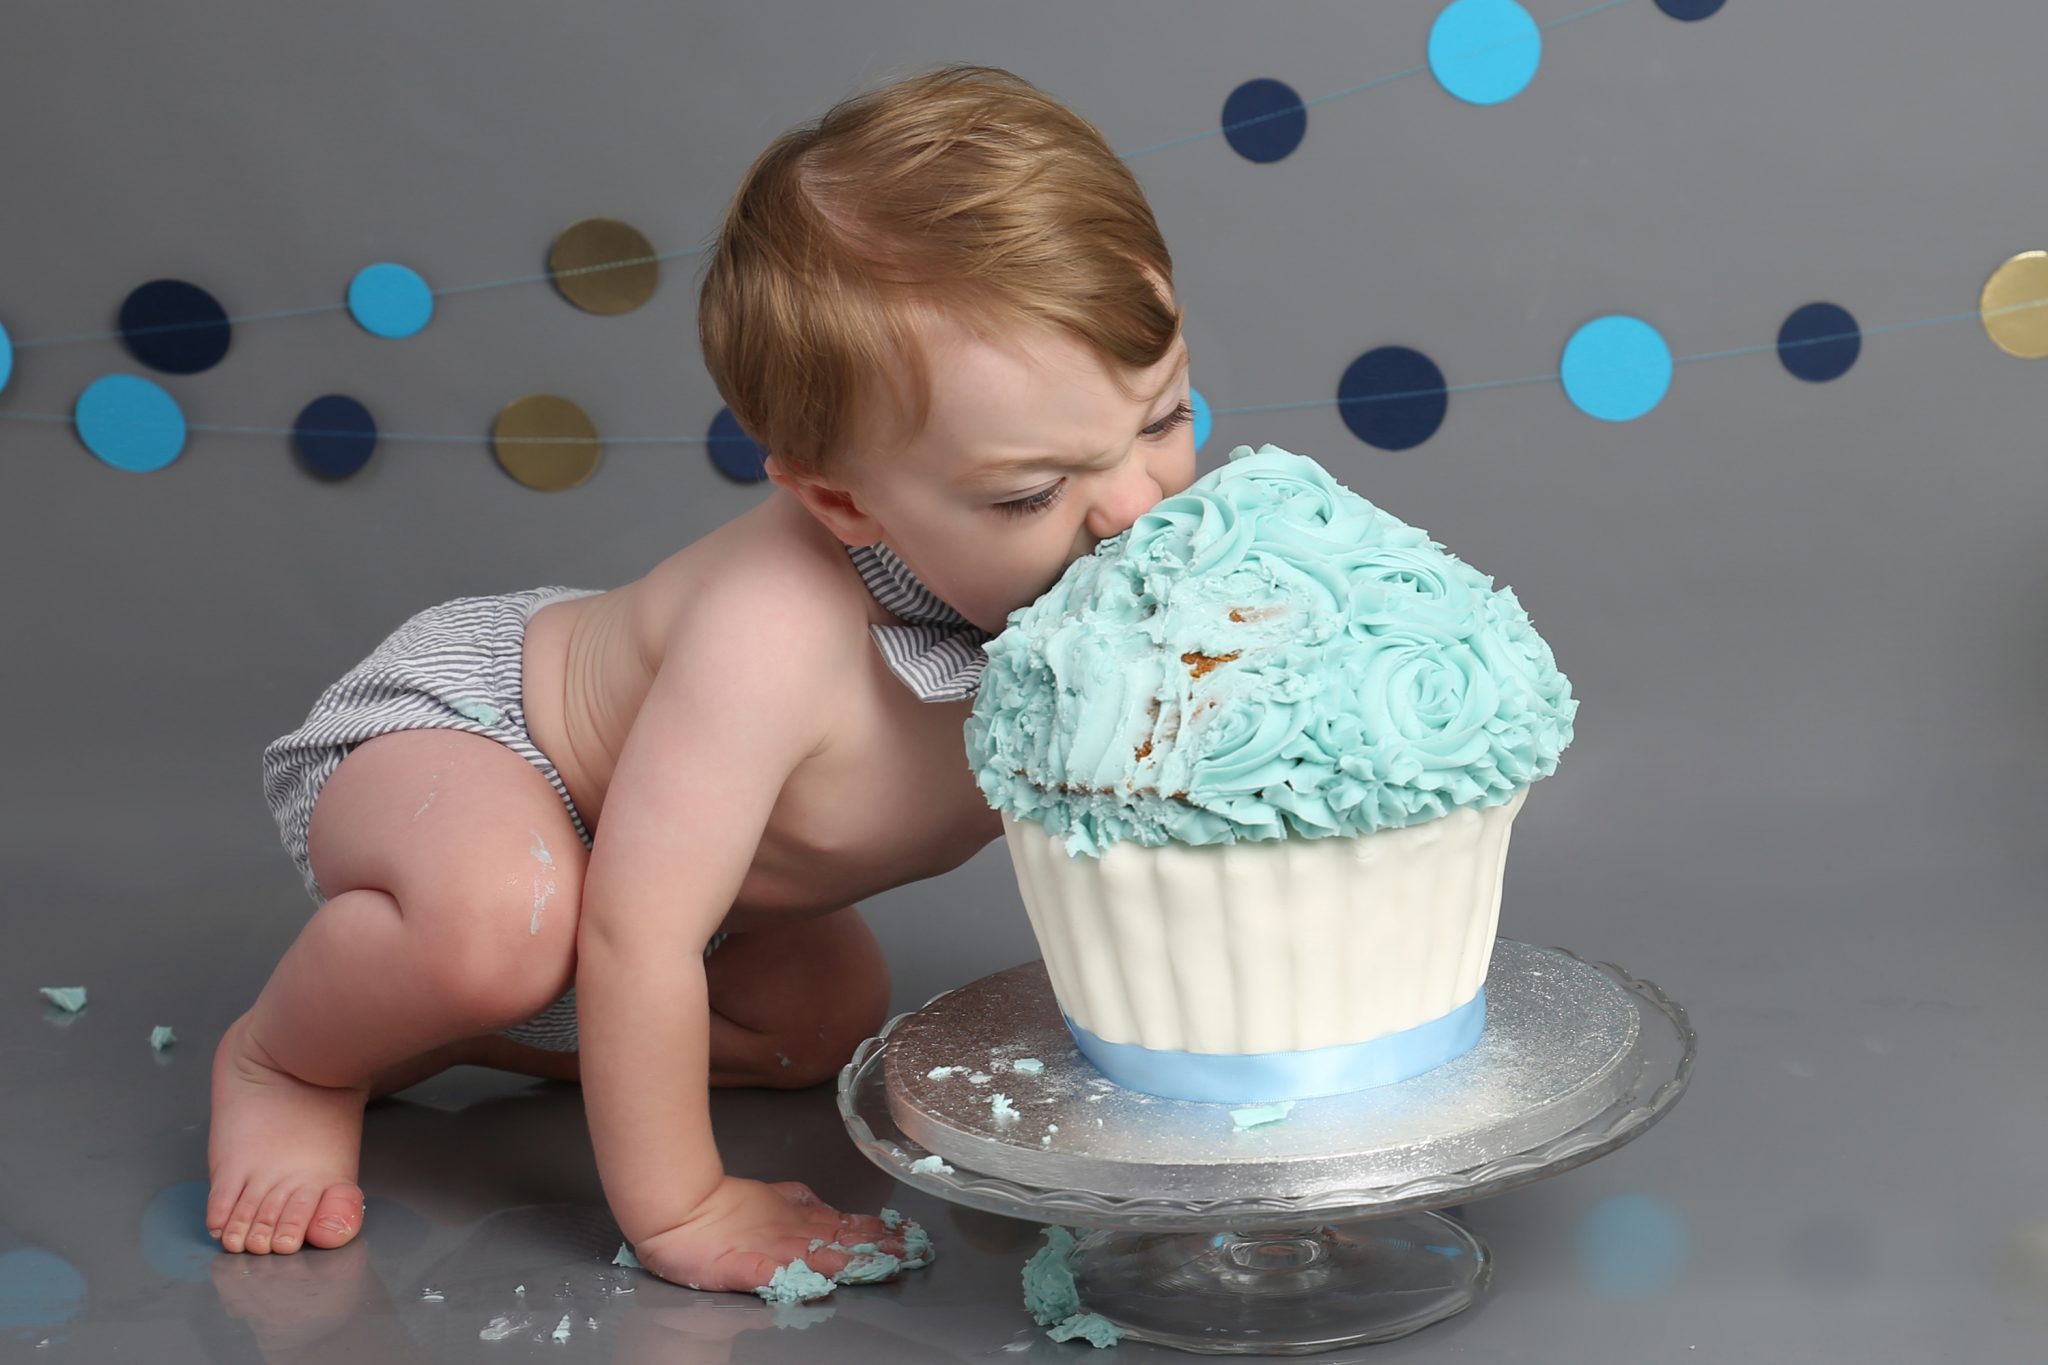 baby boy eating blue and white cake head first blue banner and grey backdrop at cake smash photoshoot west sussex